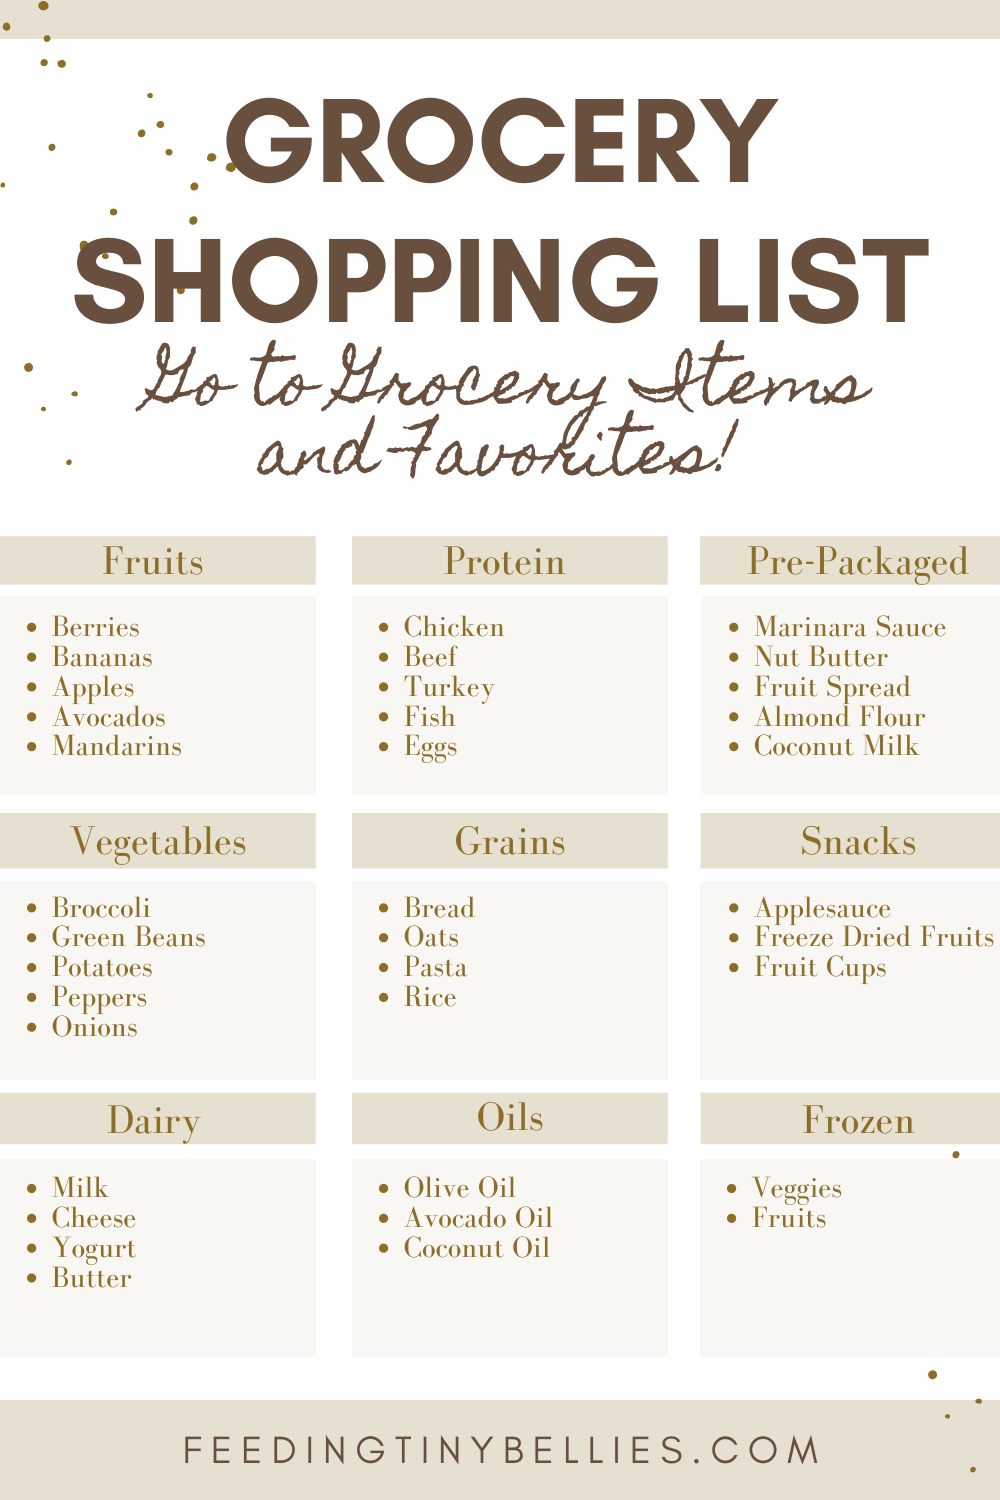 Baby-led weaning grocery stopping list - go to grocery store items and favorites!